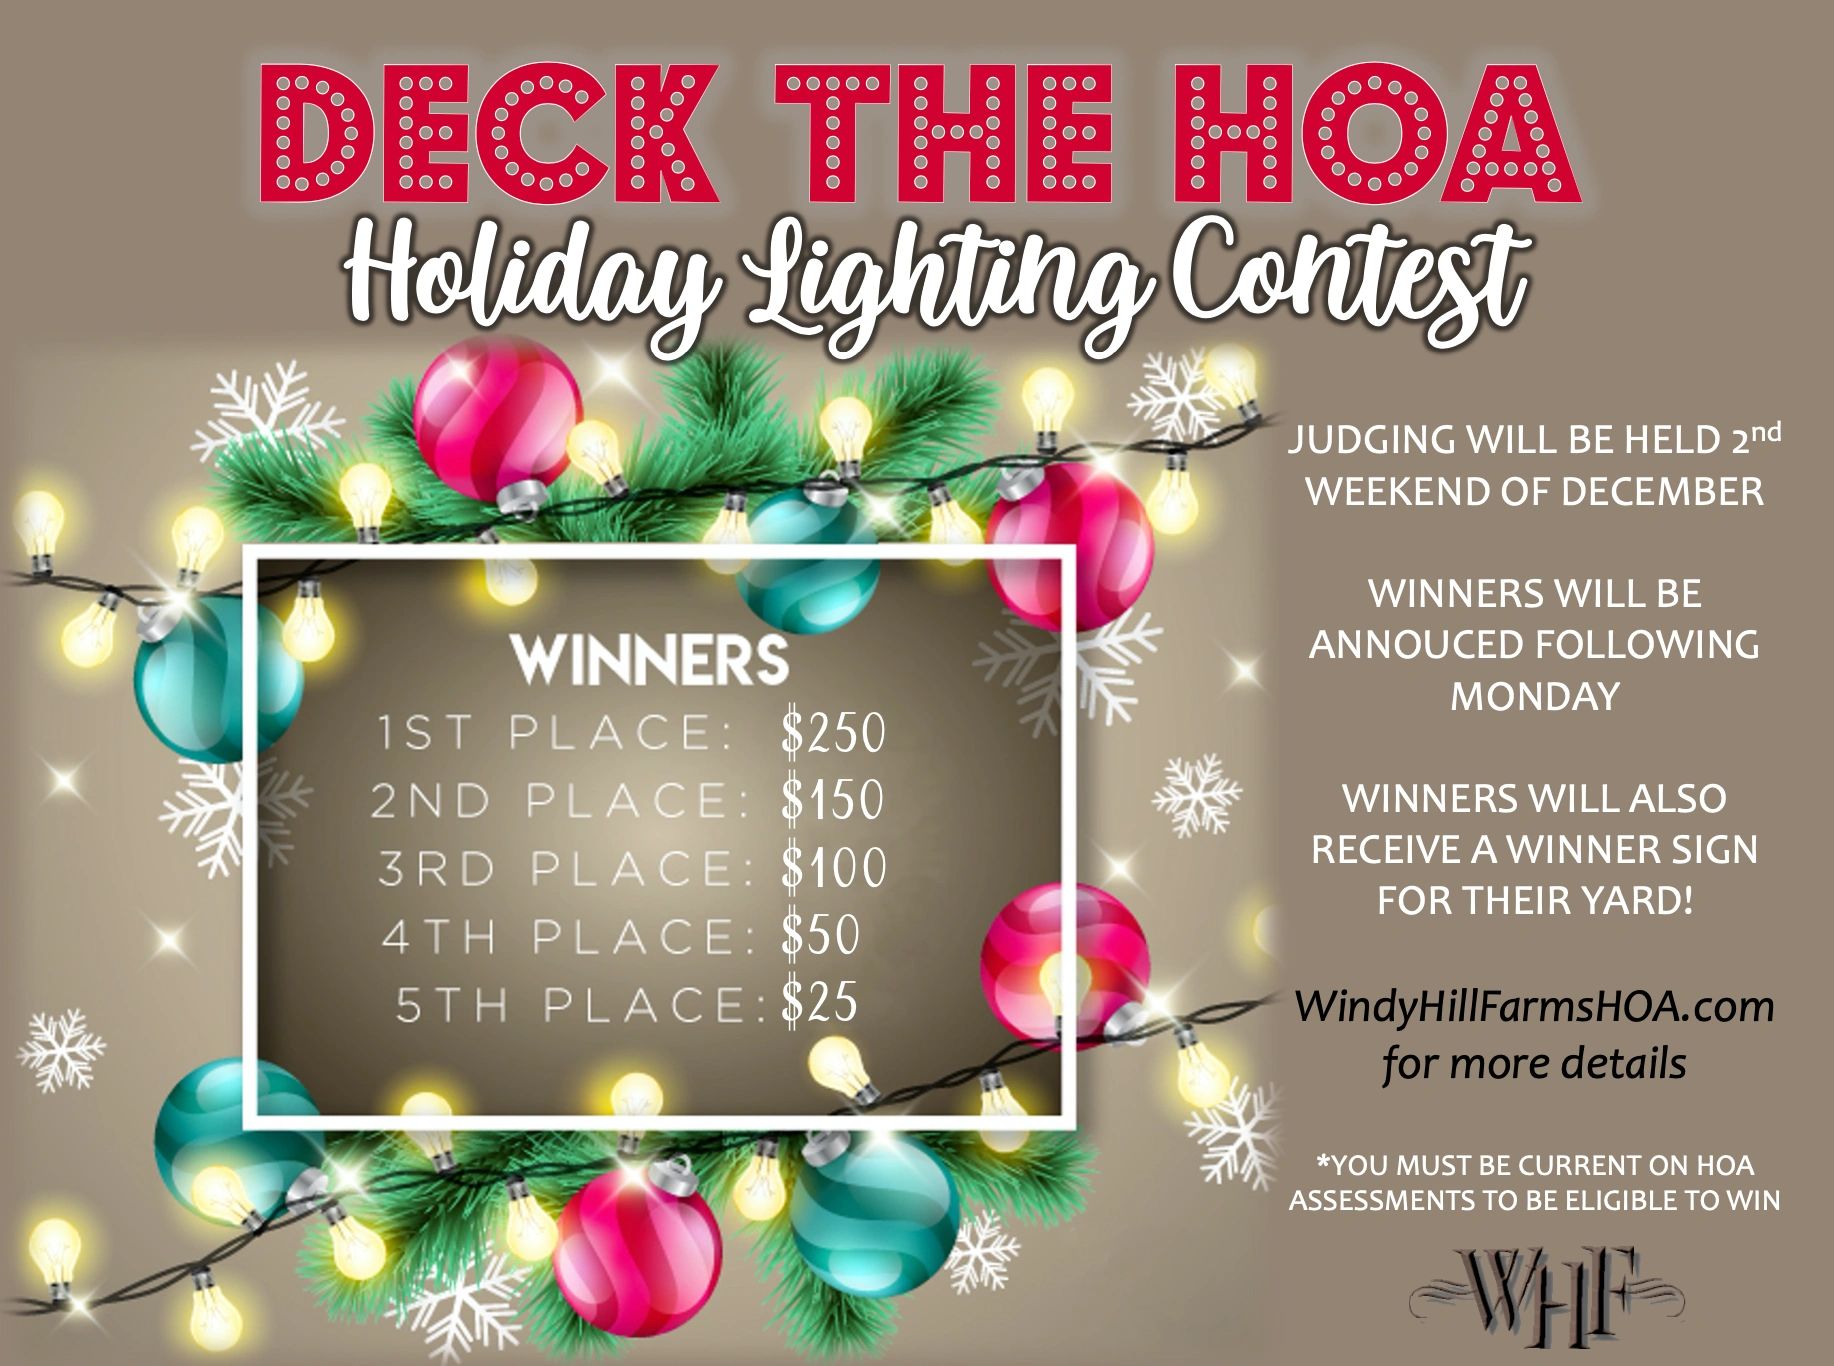 the Holiday Lighting Contest